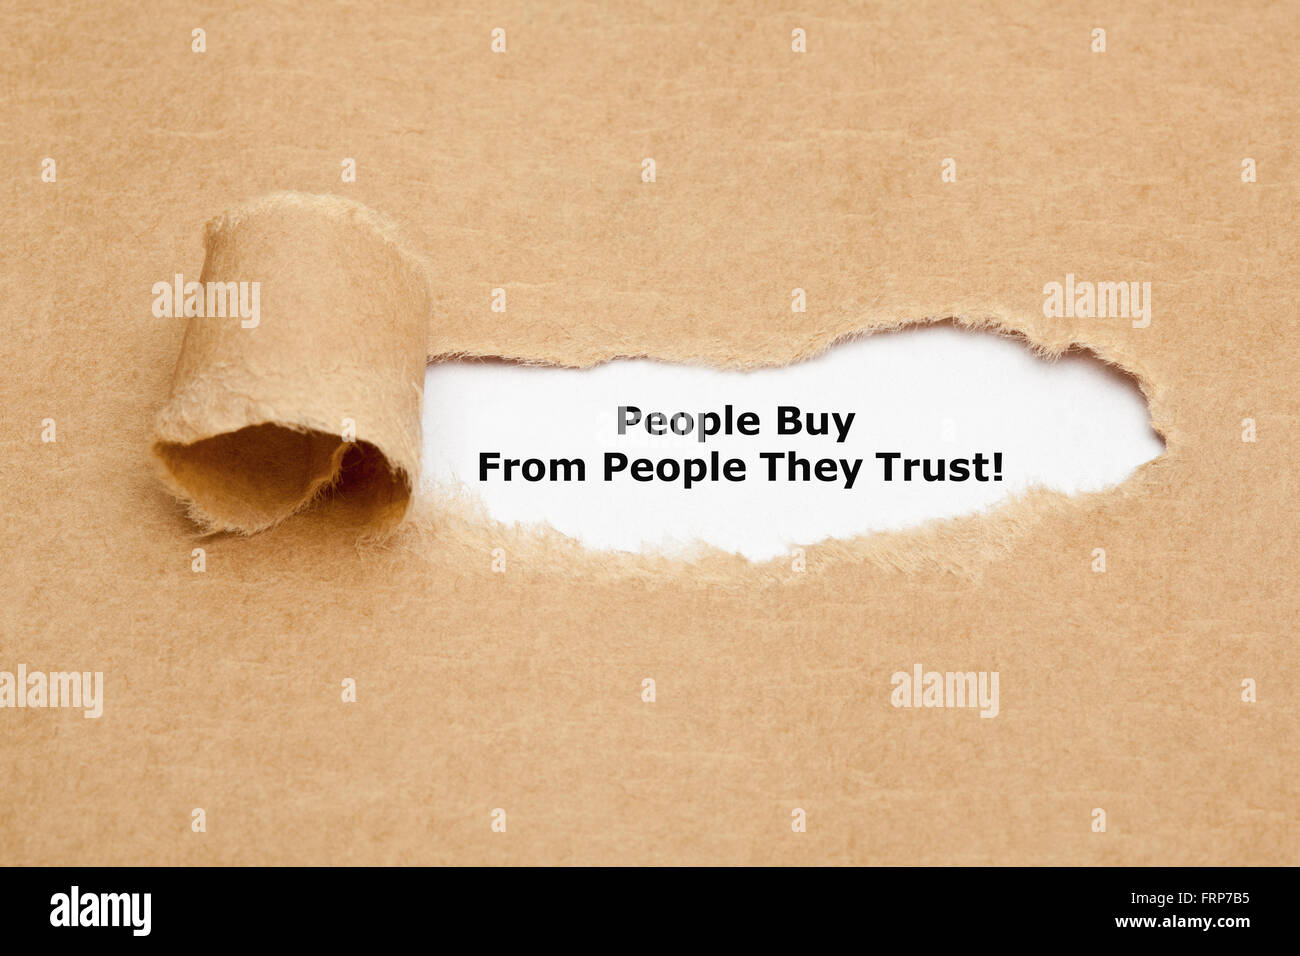 The motivational quote People Buy From People They Trust, appearing behind torn brown paper. Stock Photo